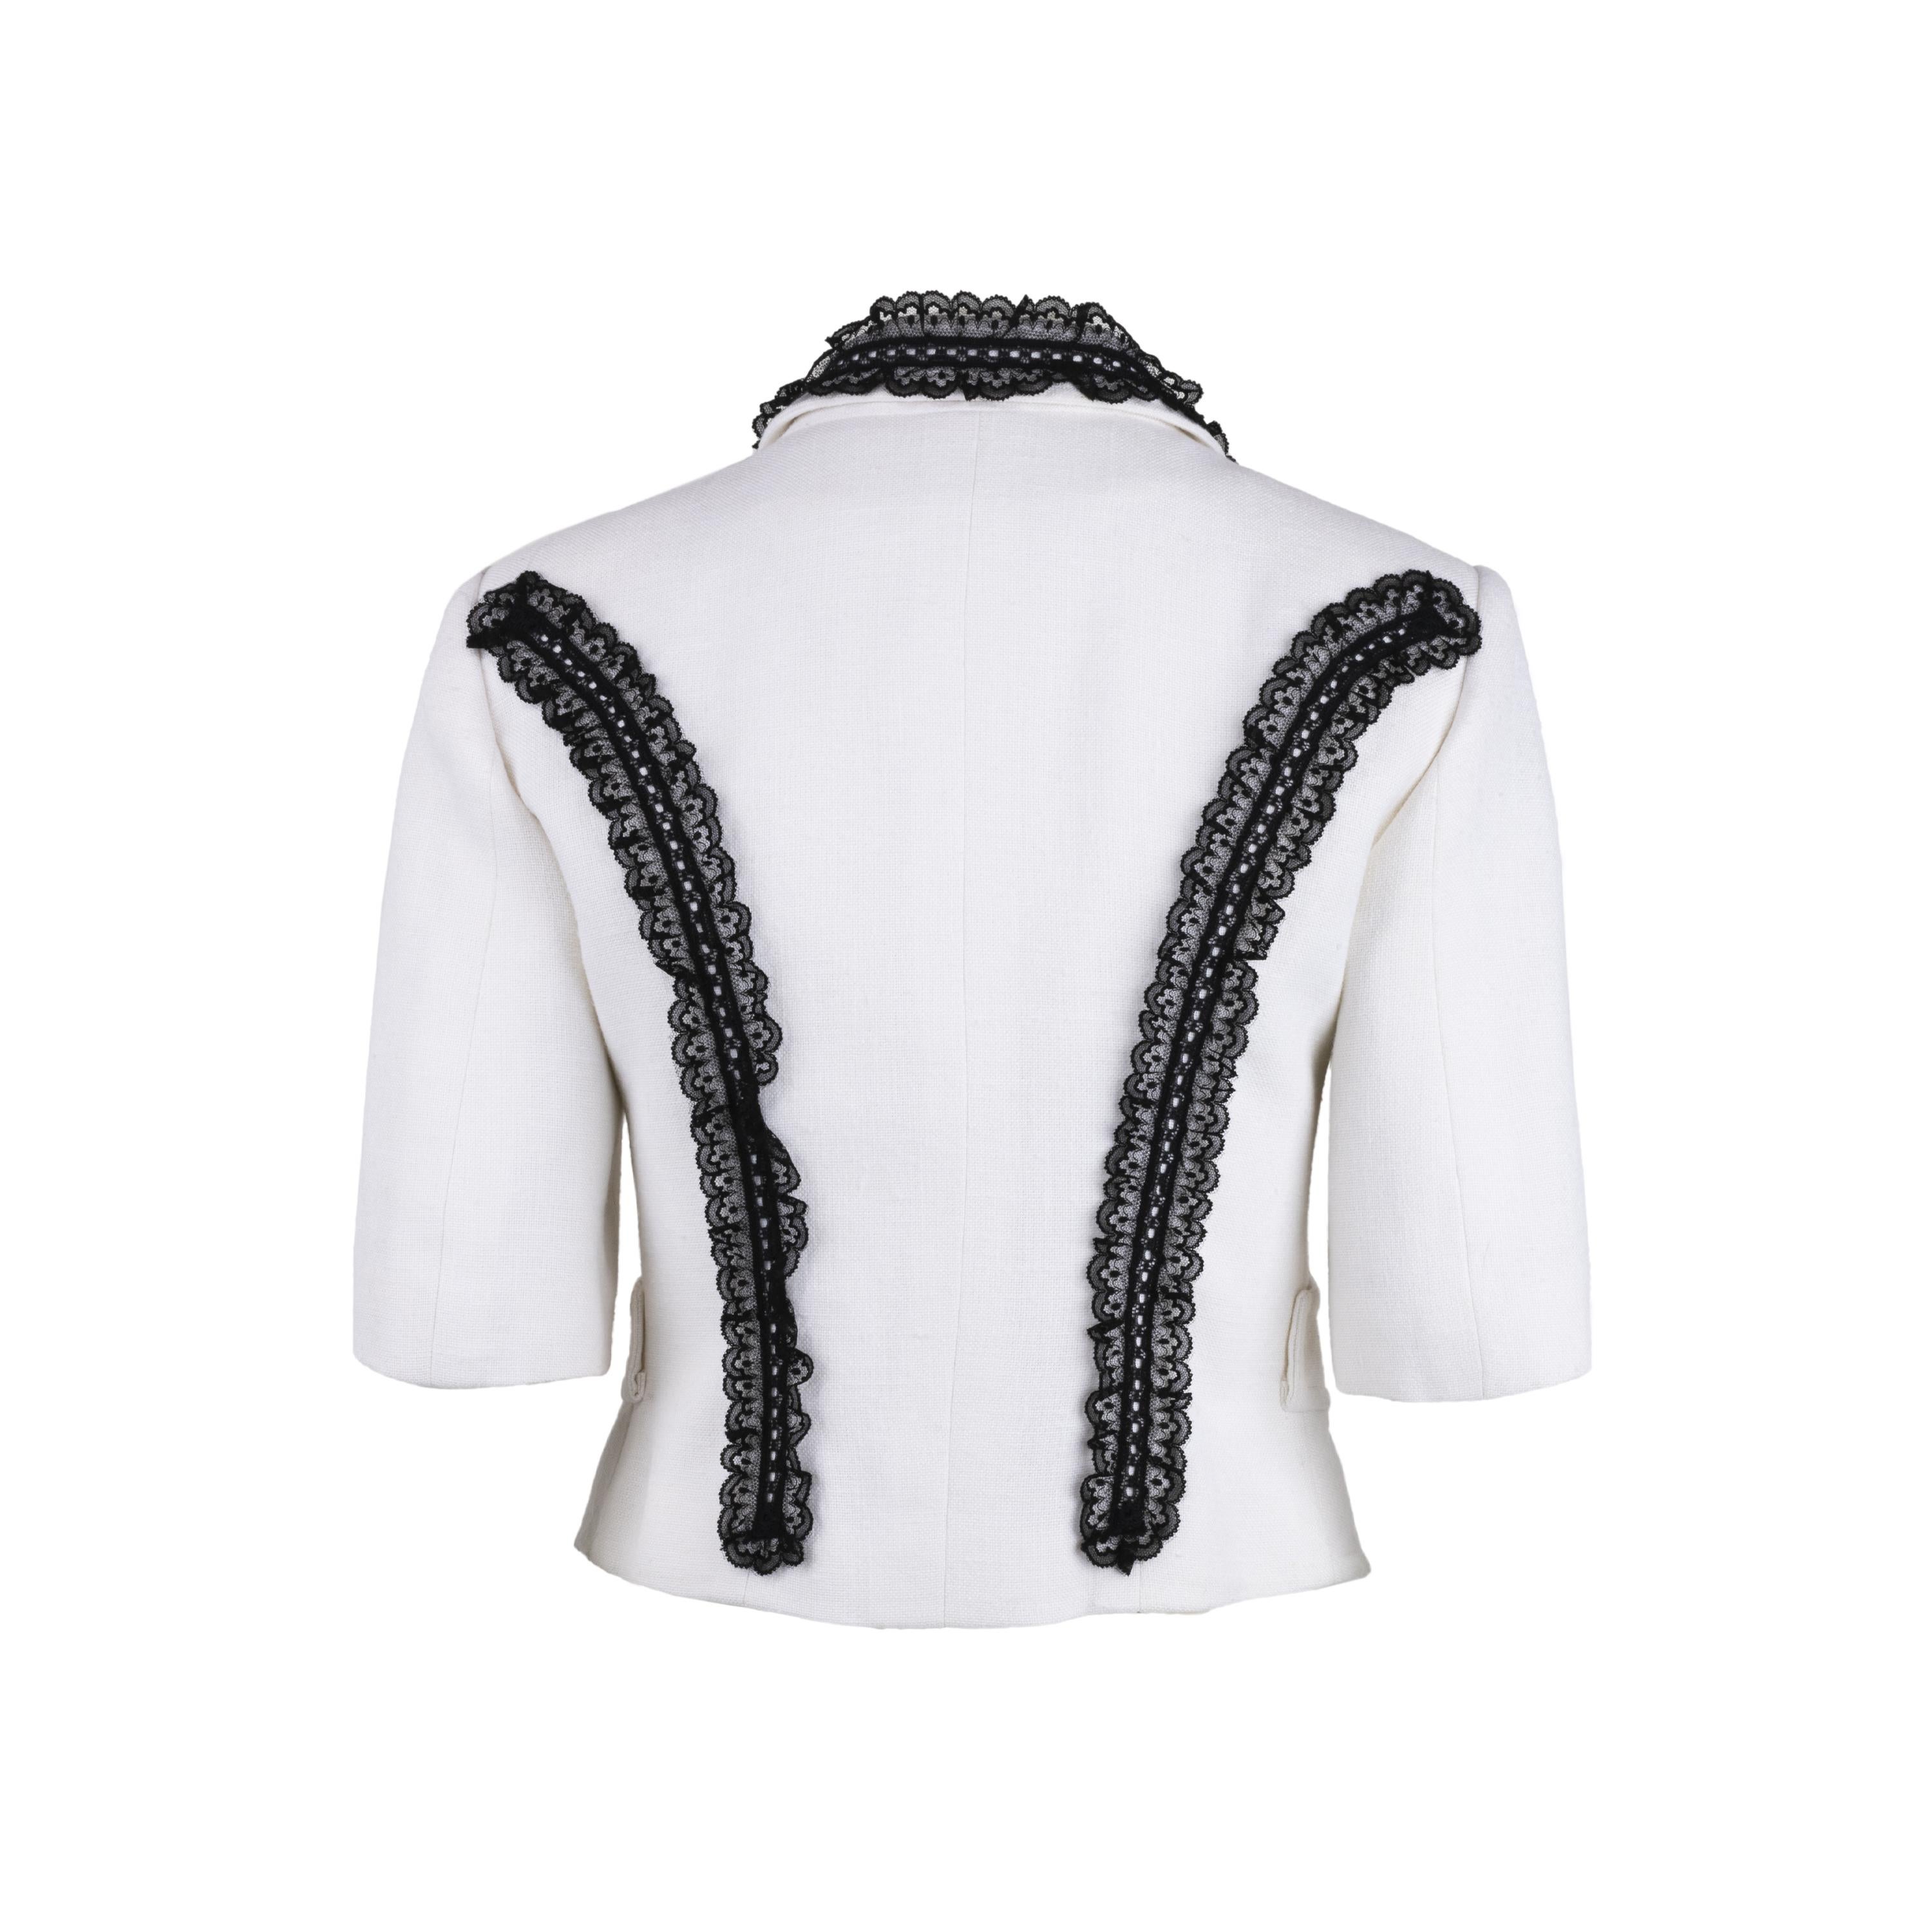 Christian Lacroix white linen jacket. Cropped style with three-quarter length sleeves decorated with black lace and heart-shaped jewel buttons.

Remarks: This garment has been customised and the sleeves have been altered.